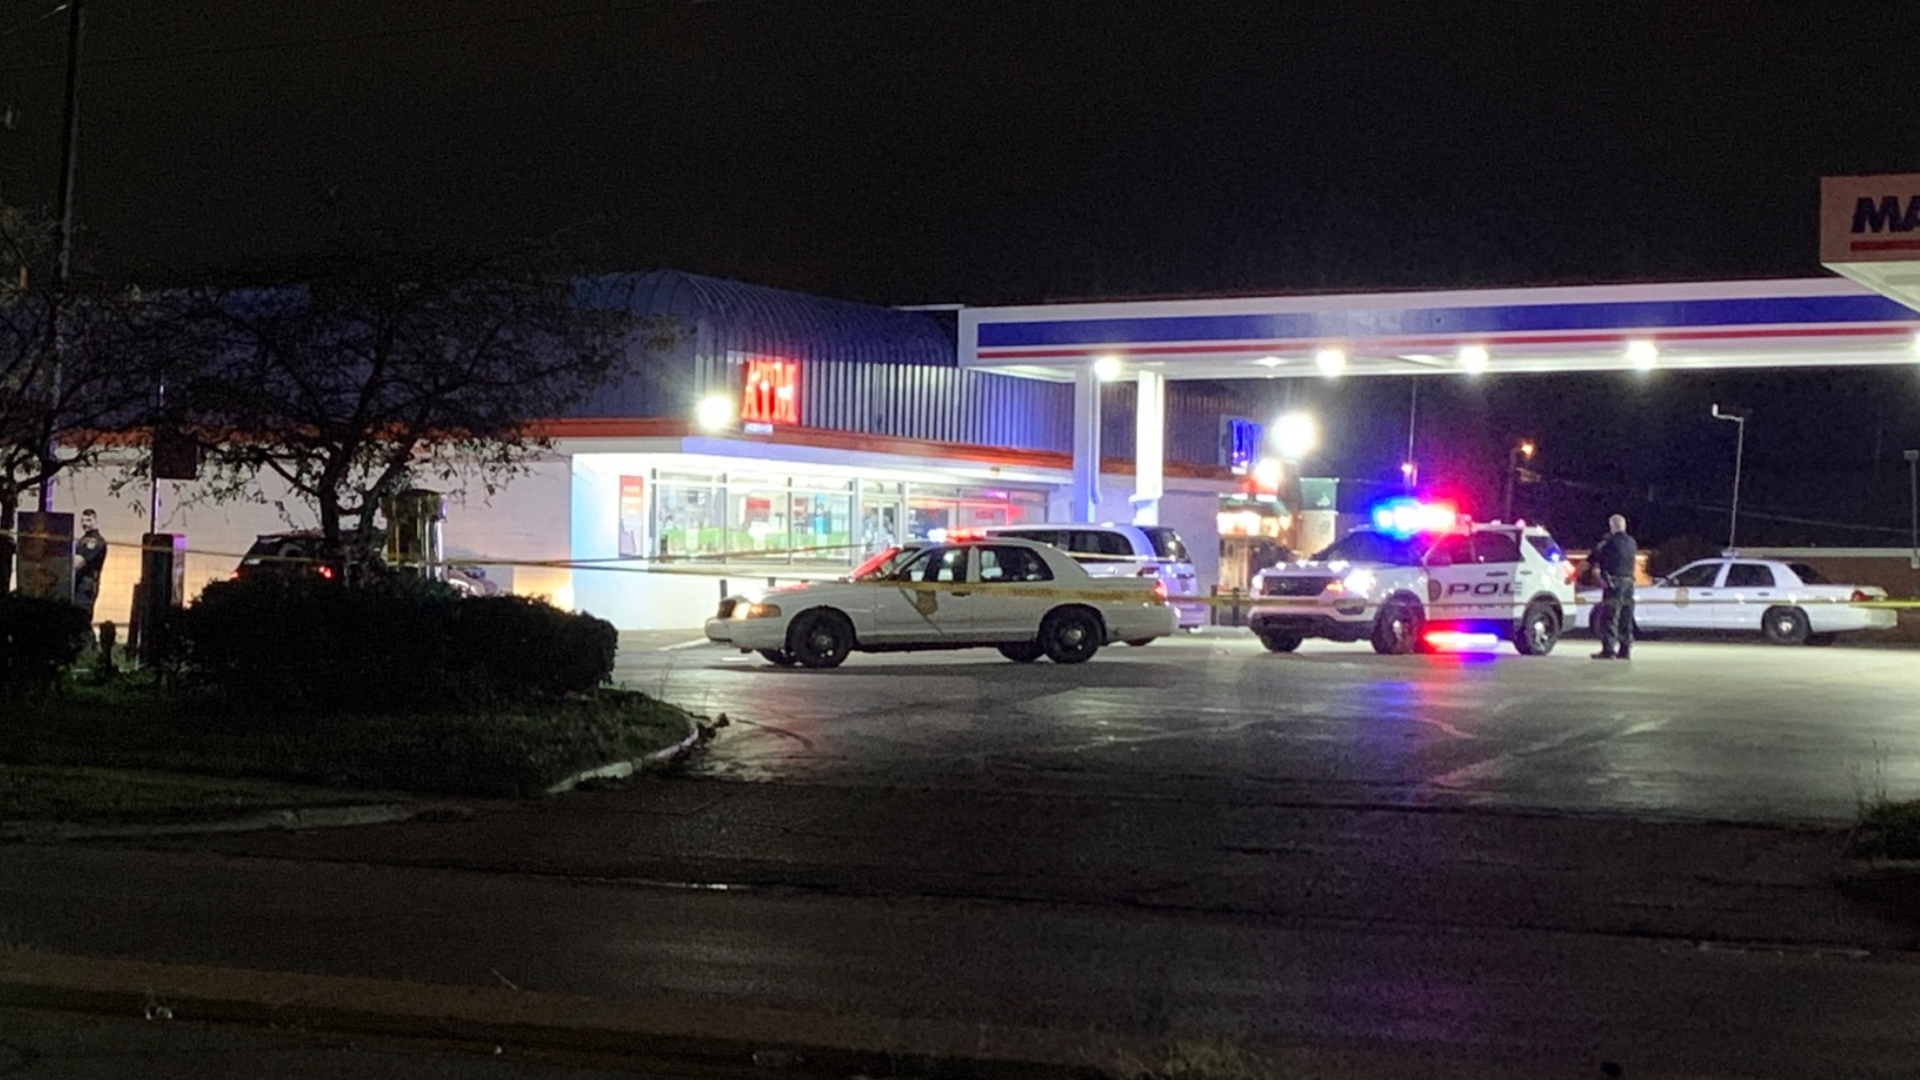 According to a preliminary investigation, police believe the man was sitting in a vehicle and was approached by one or more individuals trying to rob him.